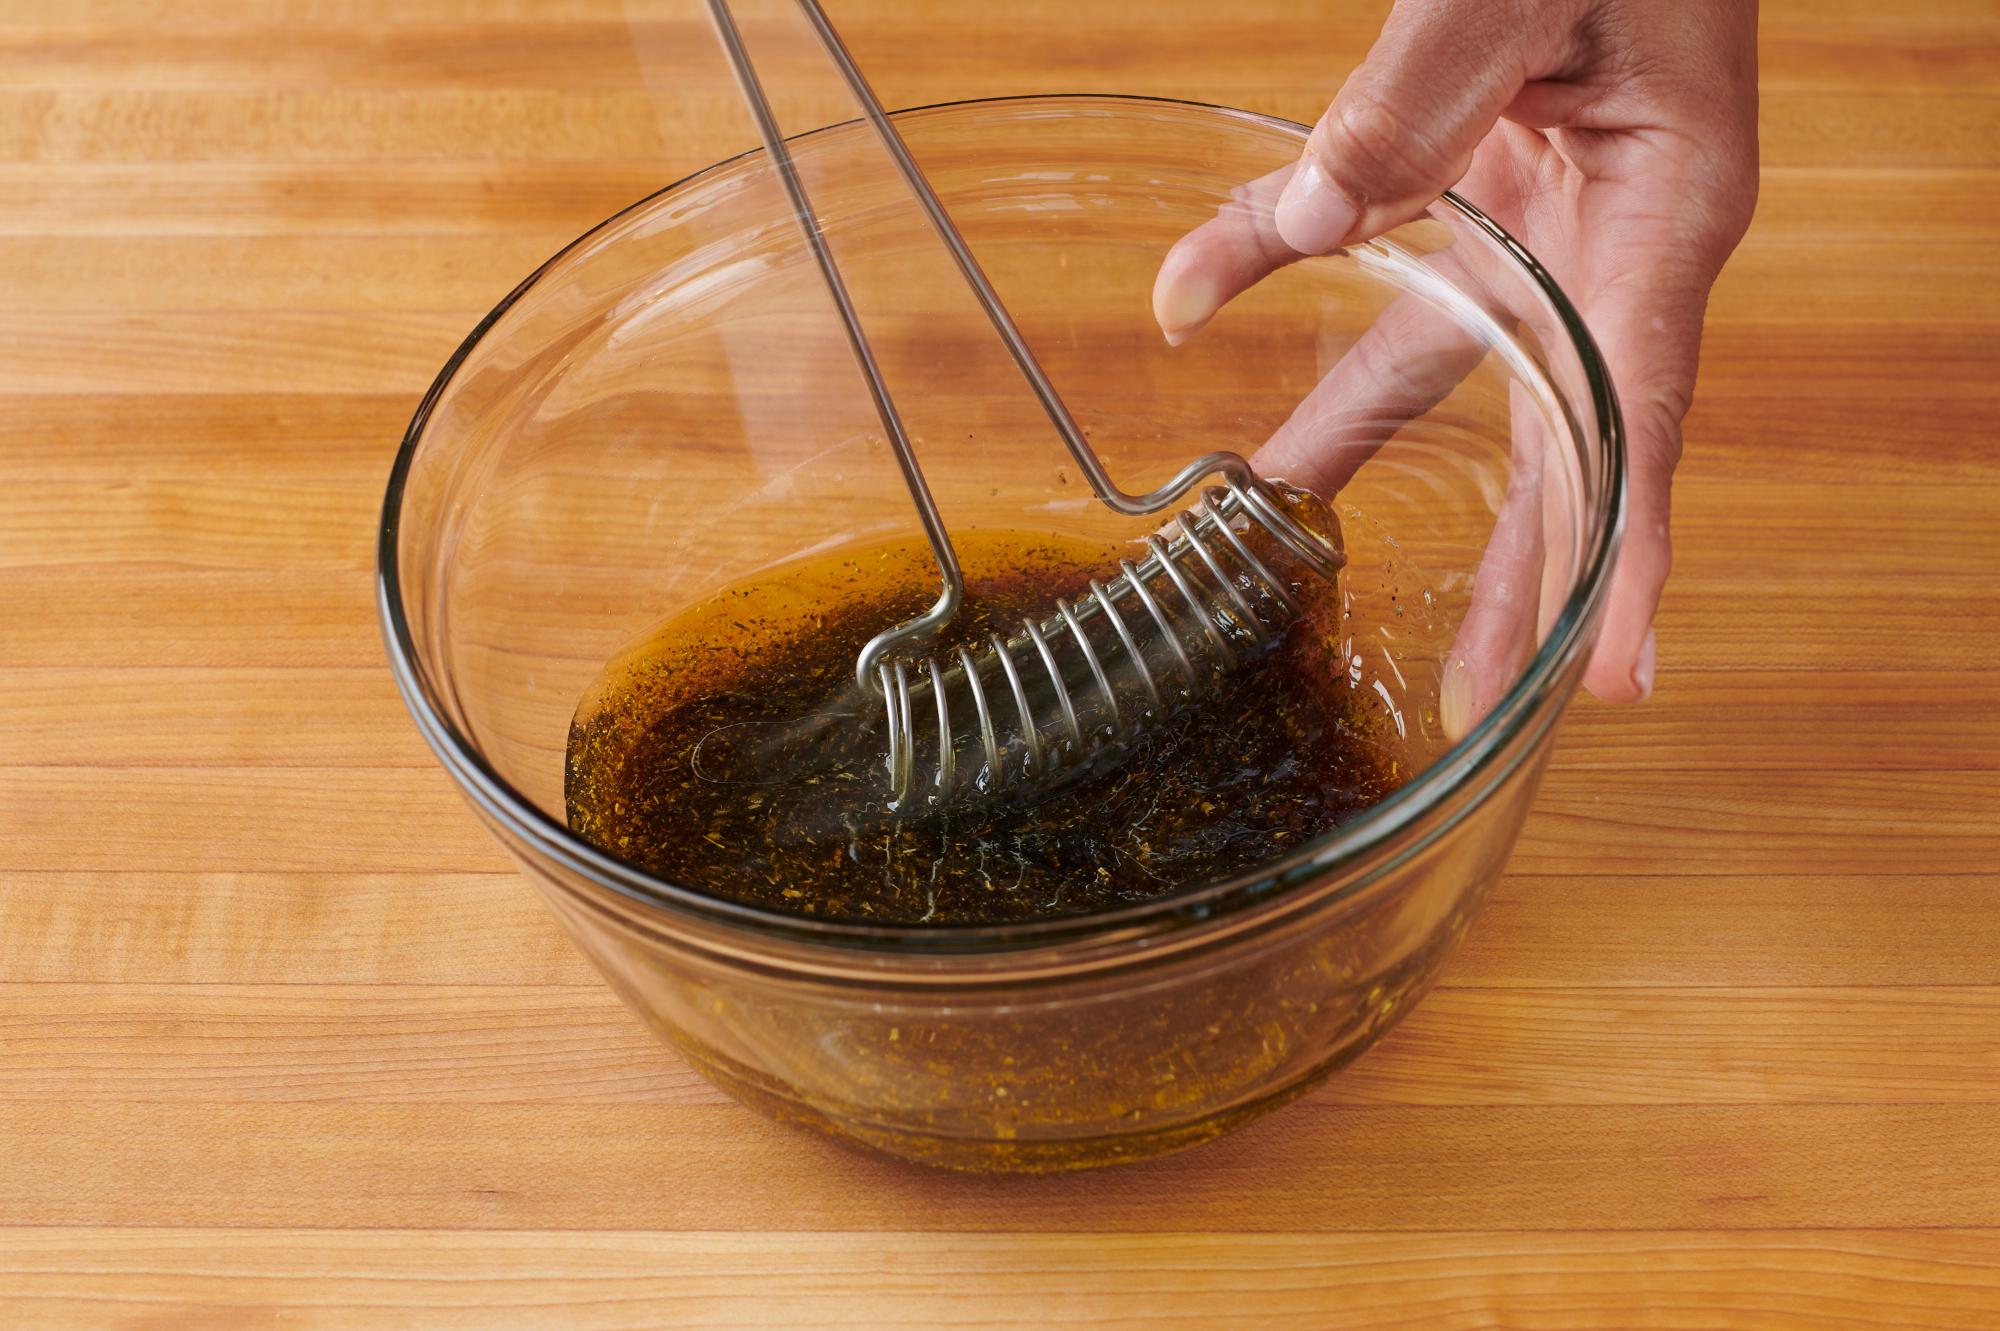 Mixing the dressing with a Mix-Stir.